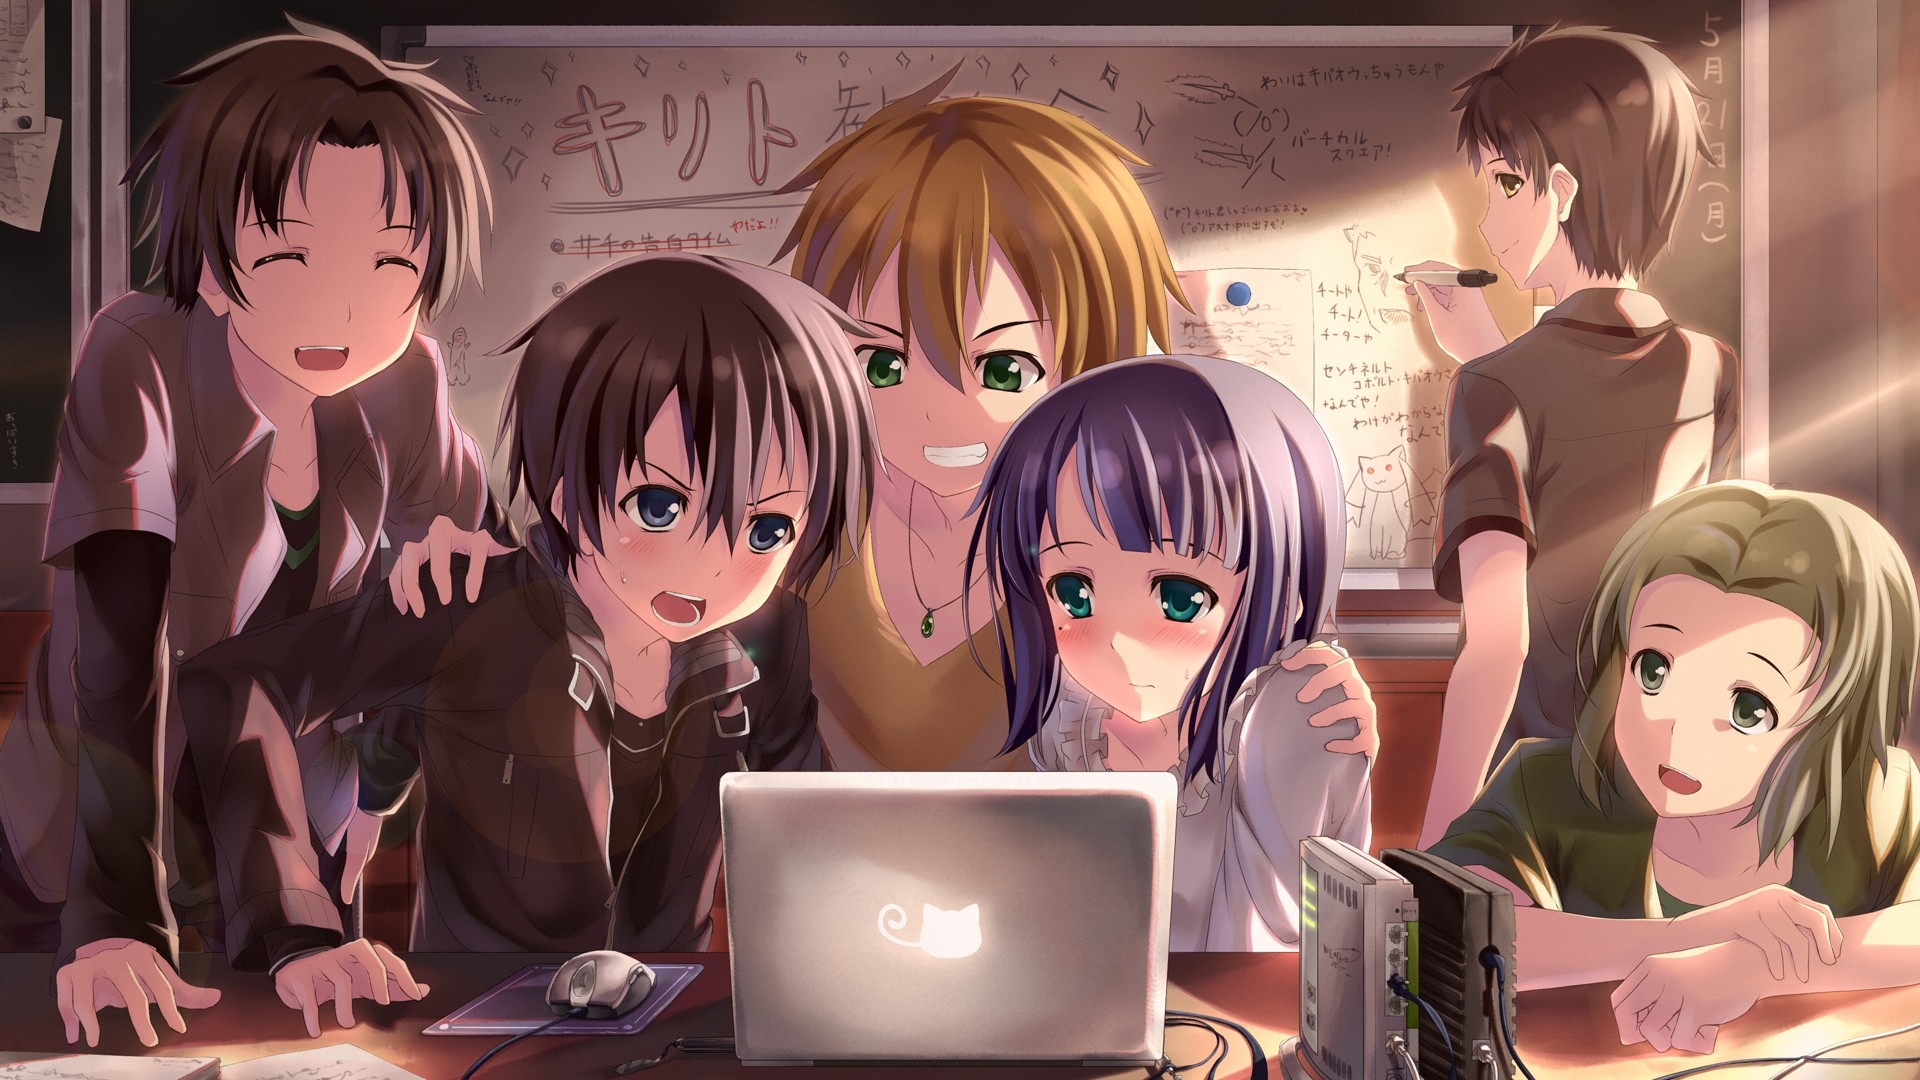 Gaming With Friends Anime - 1920x1080 Wallpaper 